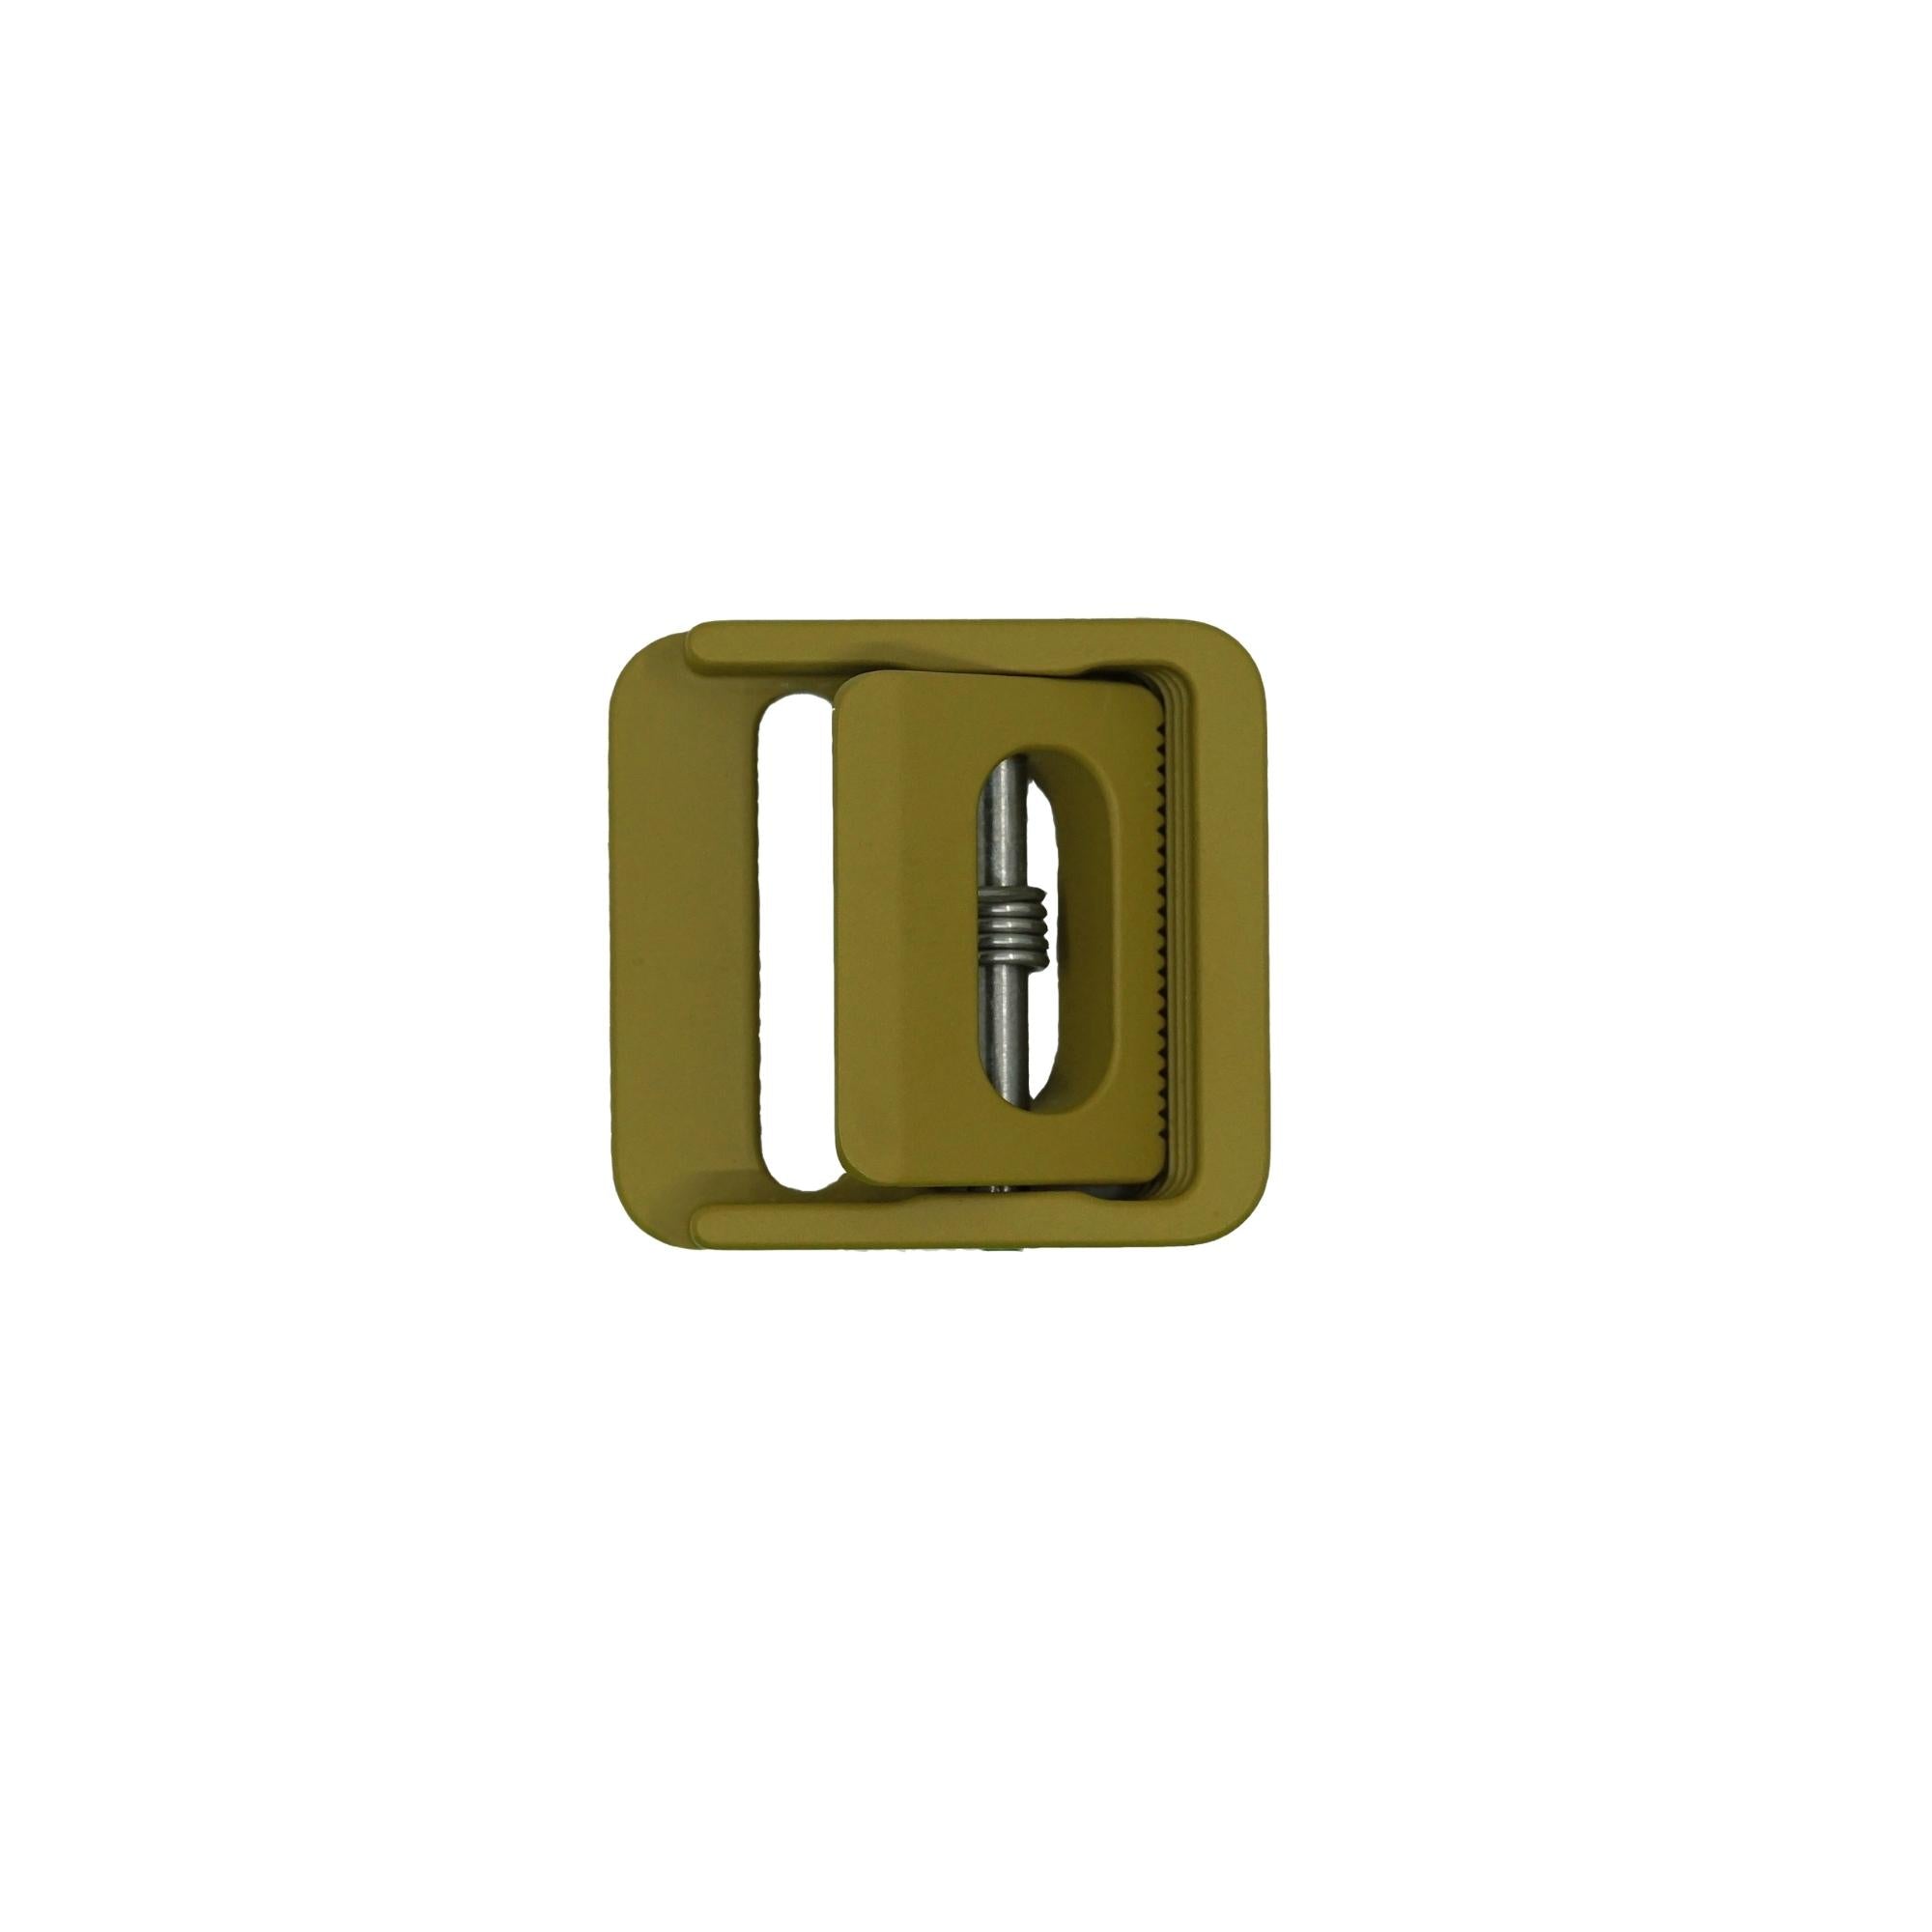 Buy Wholesale China High Polished Stainless Steel Toggle Latch